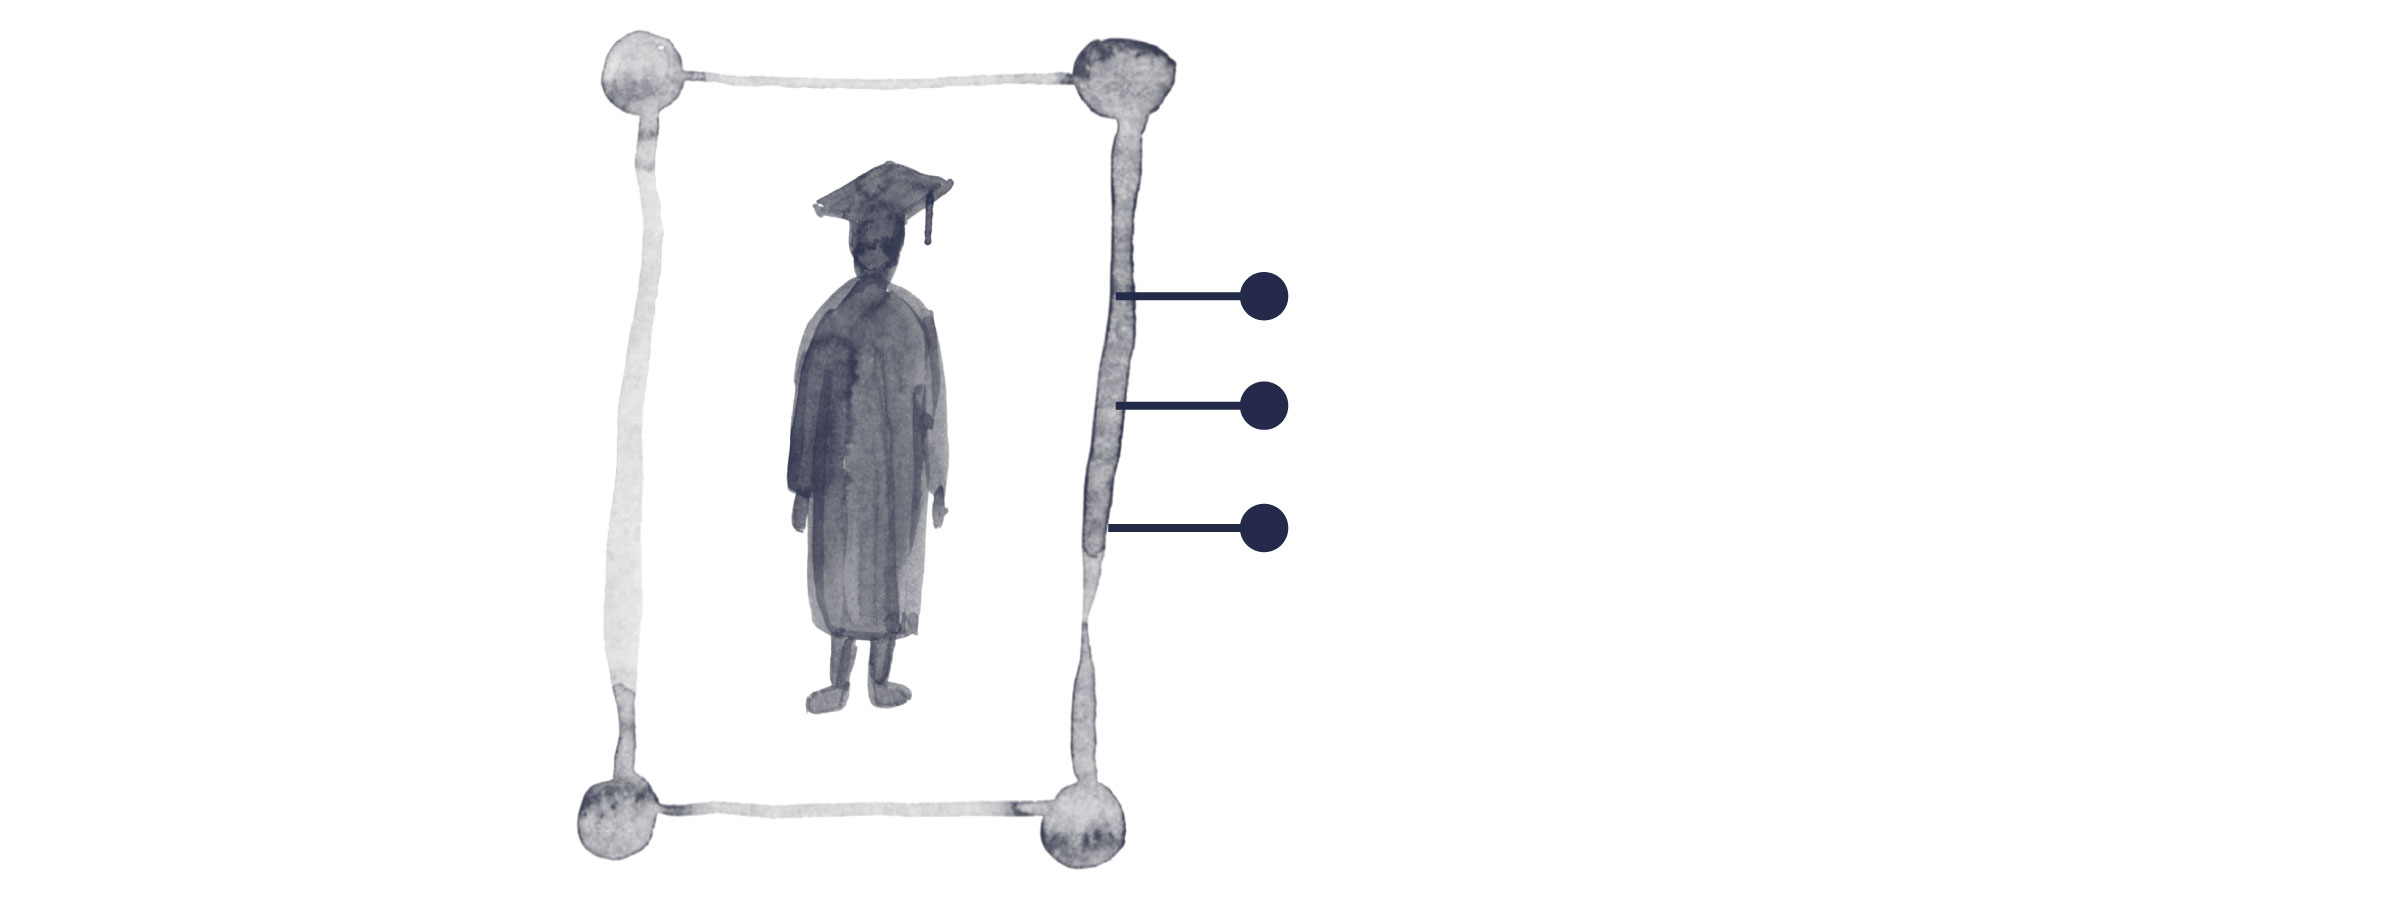 Illustration of a student being scanned and labeled